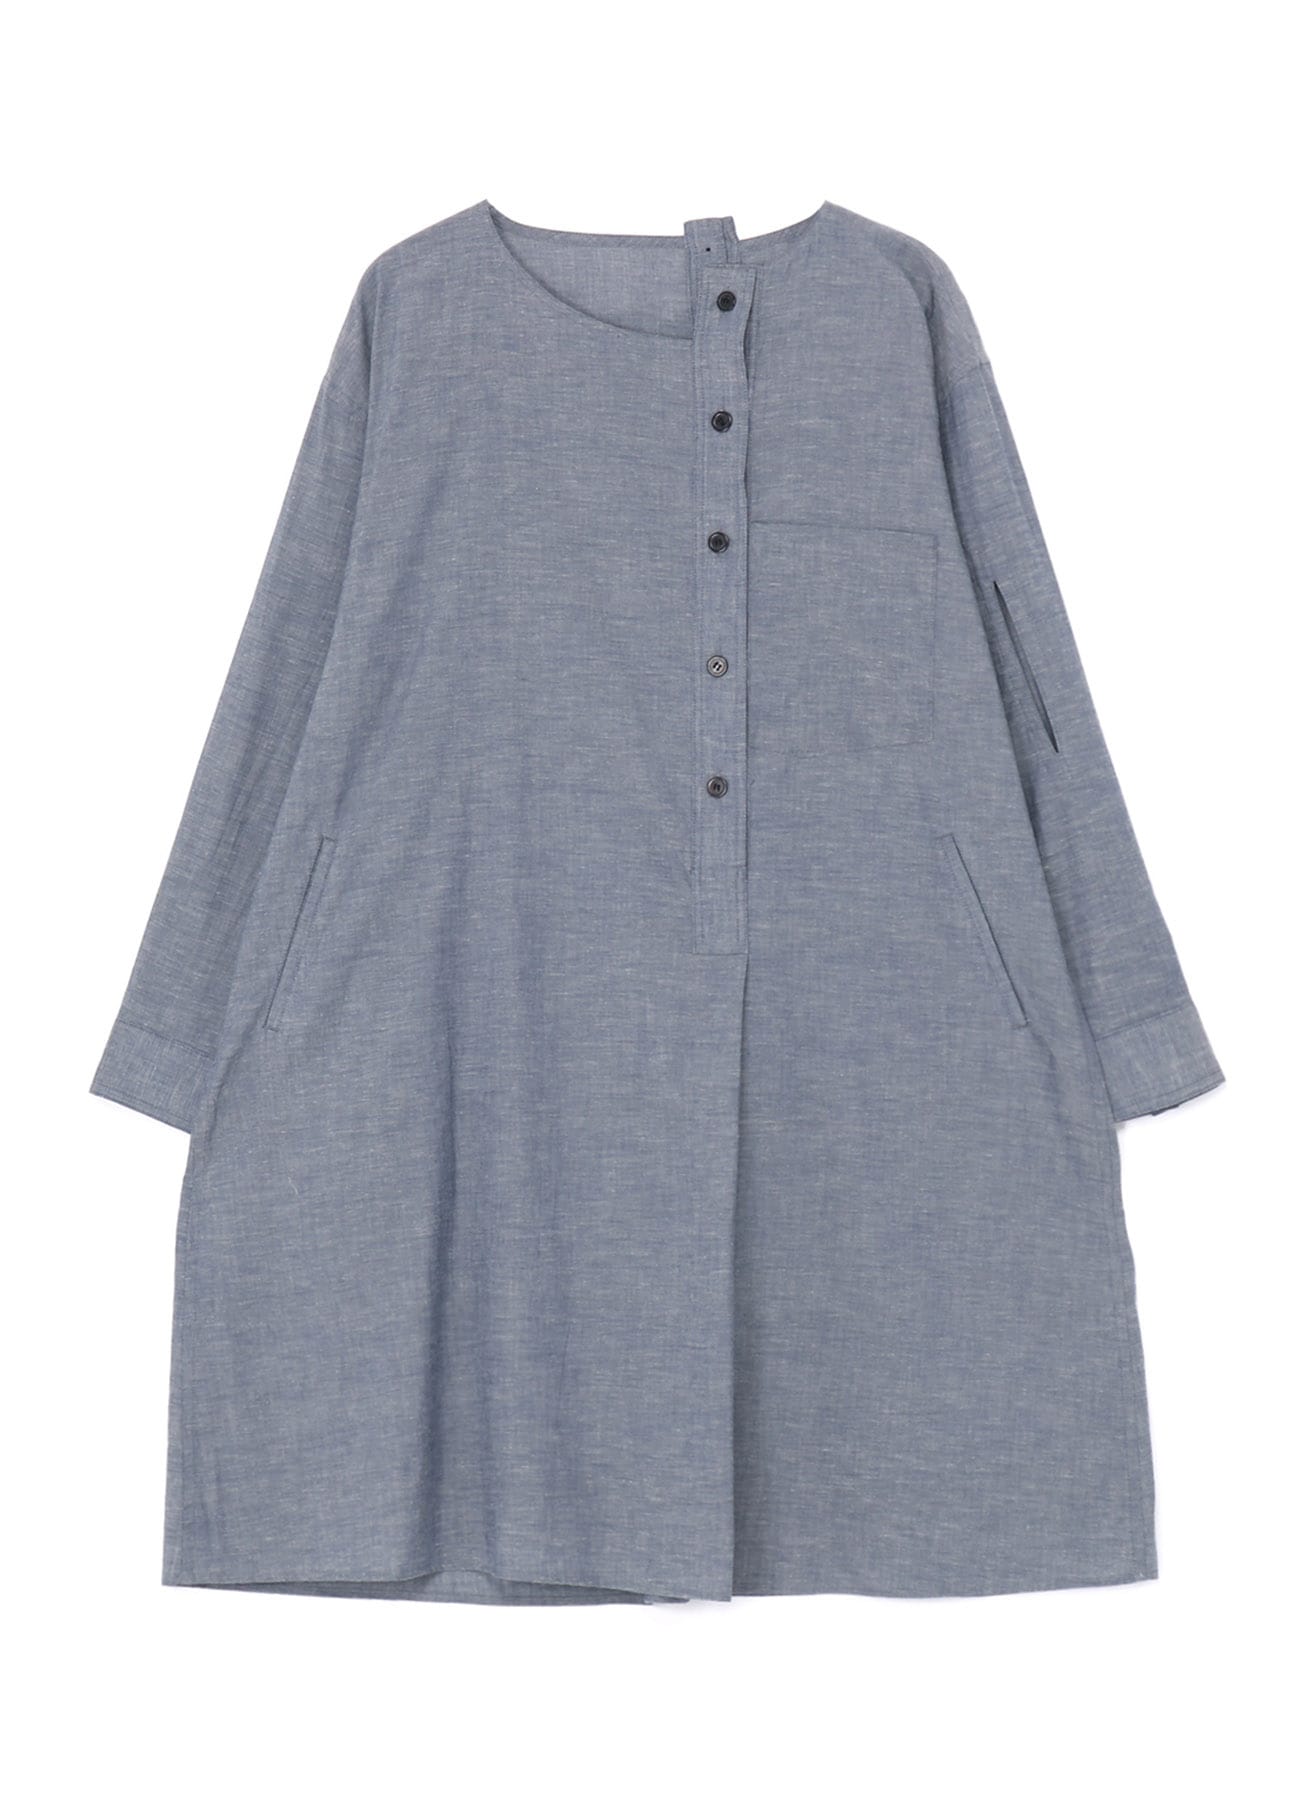 CHAMBRAY DECONSTRUCTED DRESS